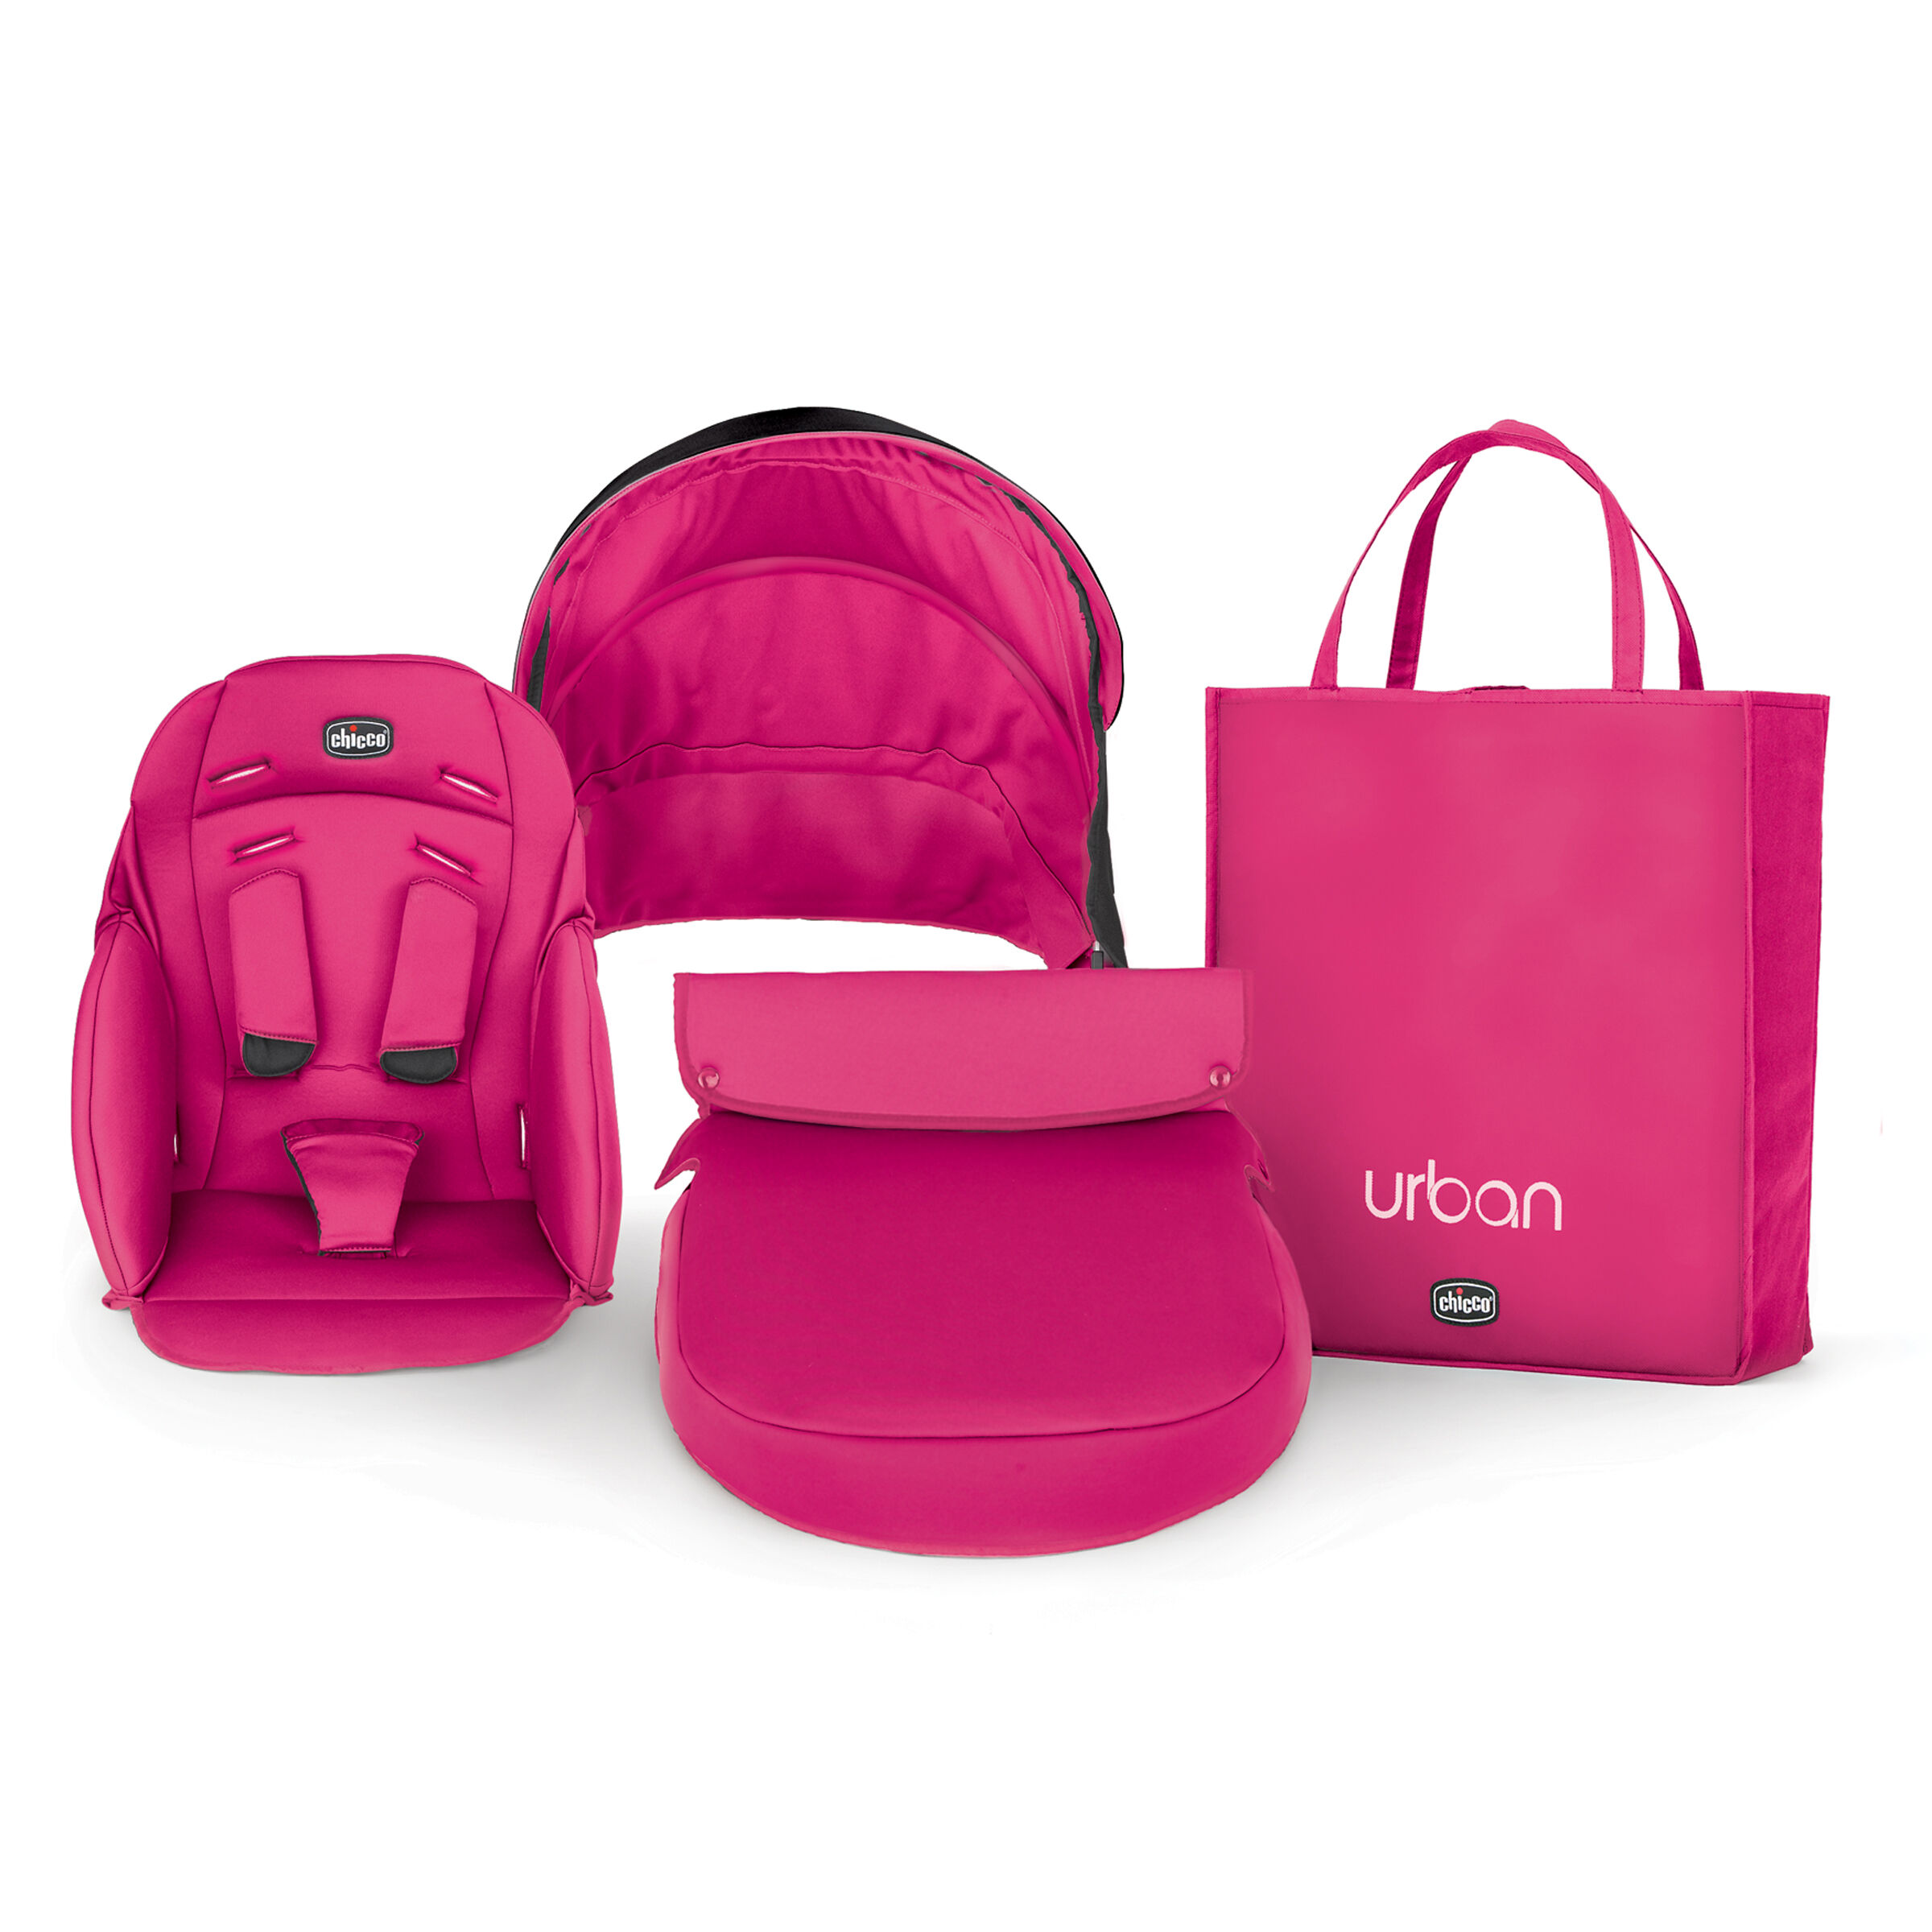 chicco color pack